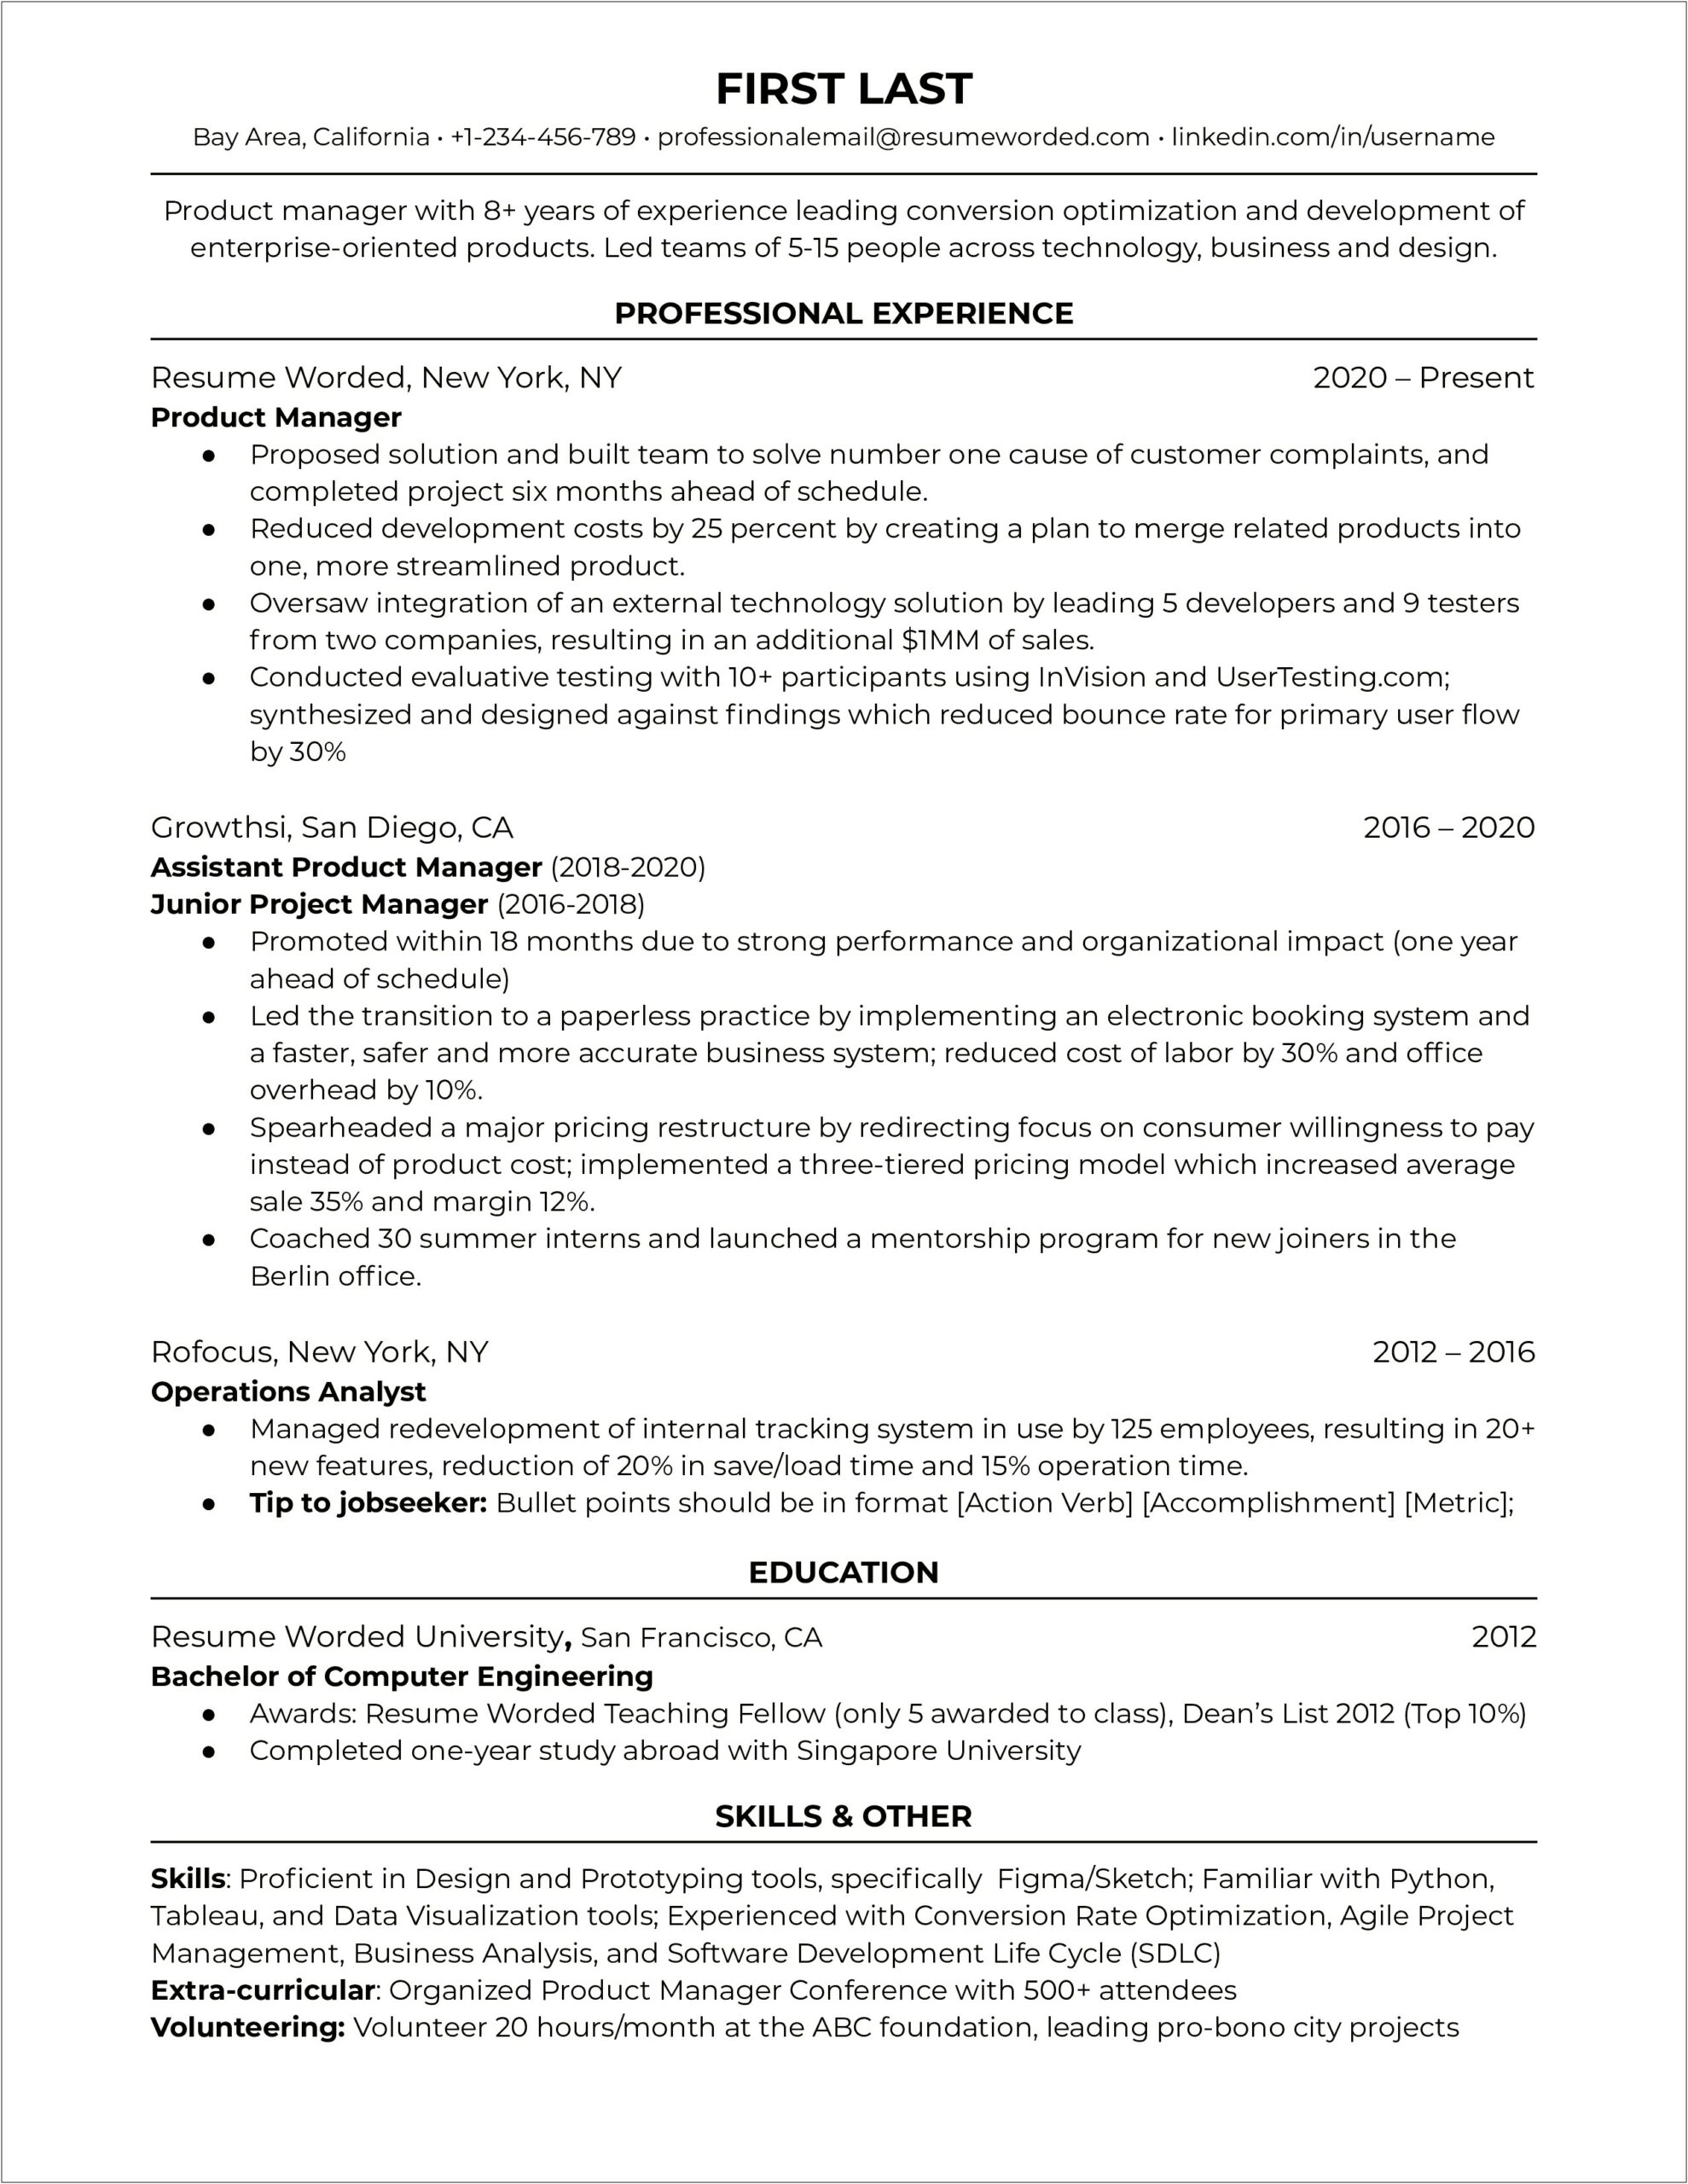 Product Manager Resume Skills Section